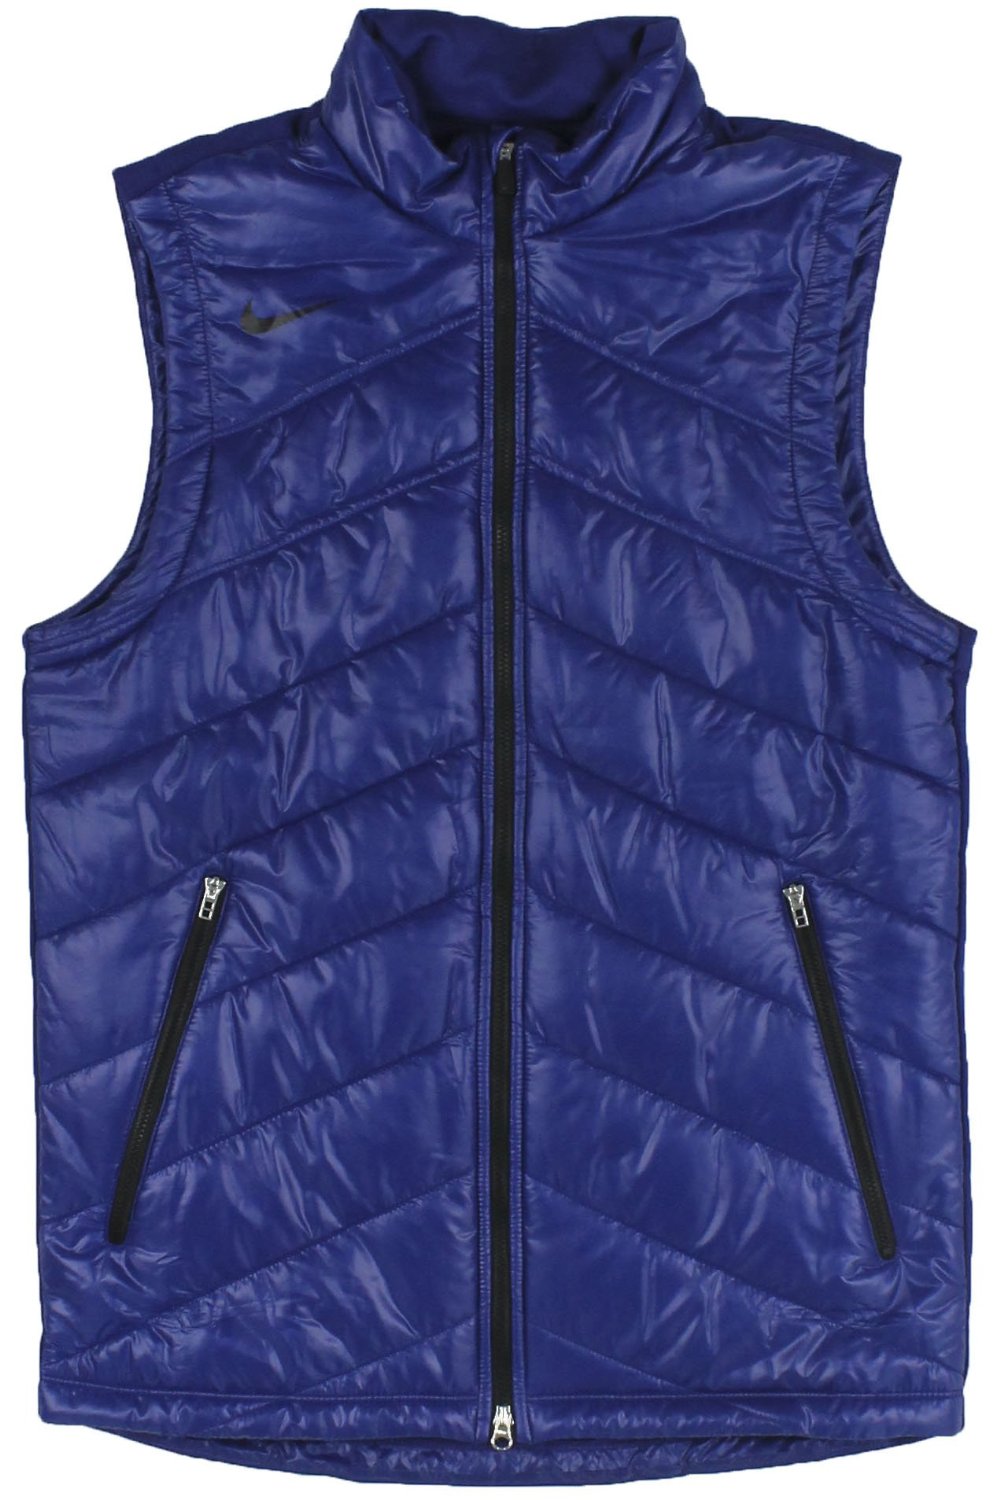 Mens Nike Thermal Mapping Golf Vests